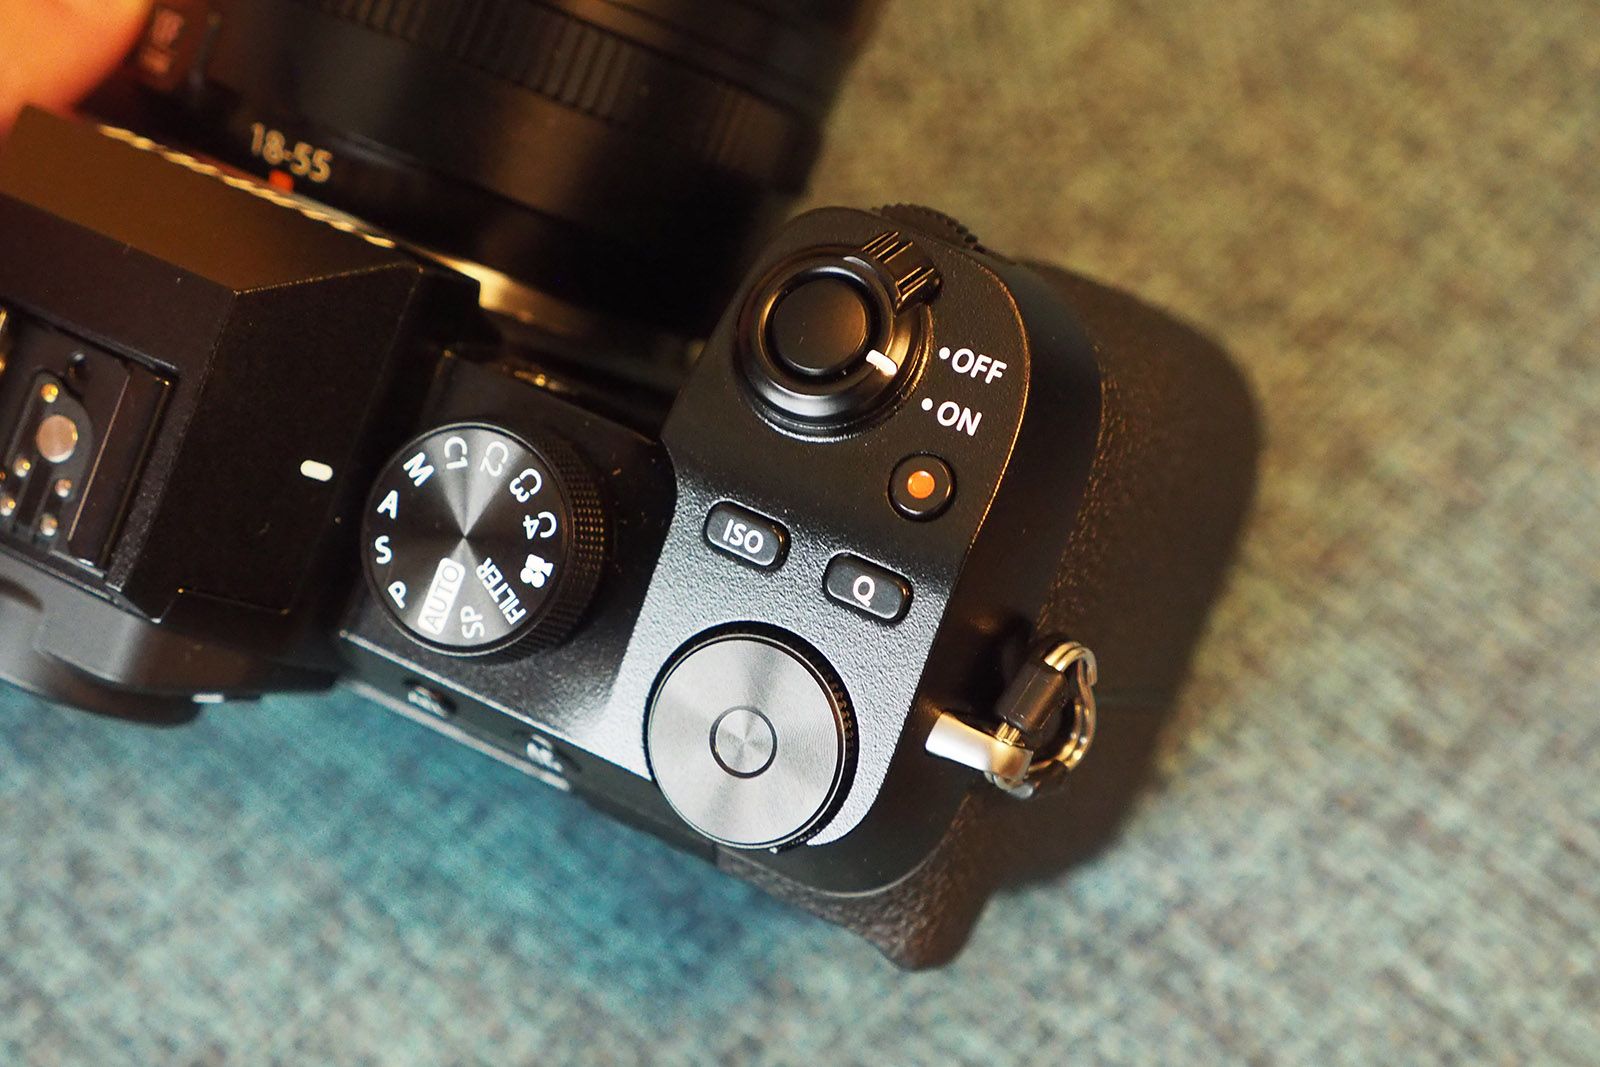 What to look for in a mirrorless camera? We highlight why the X-S10 is a great option photo 2